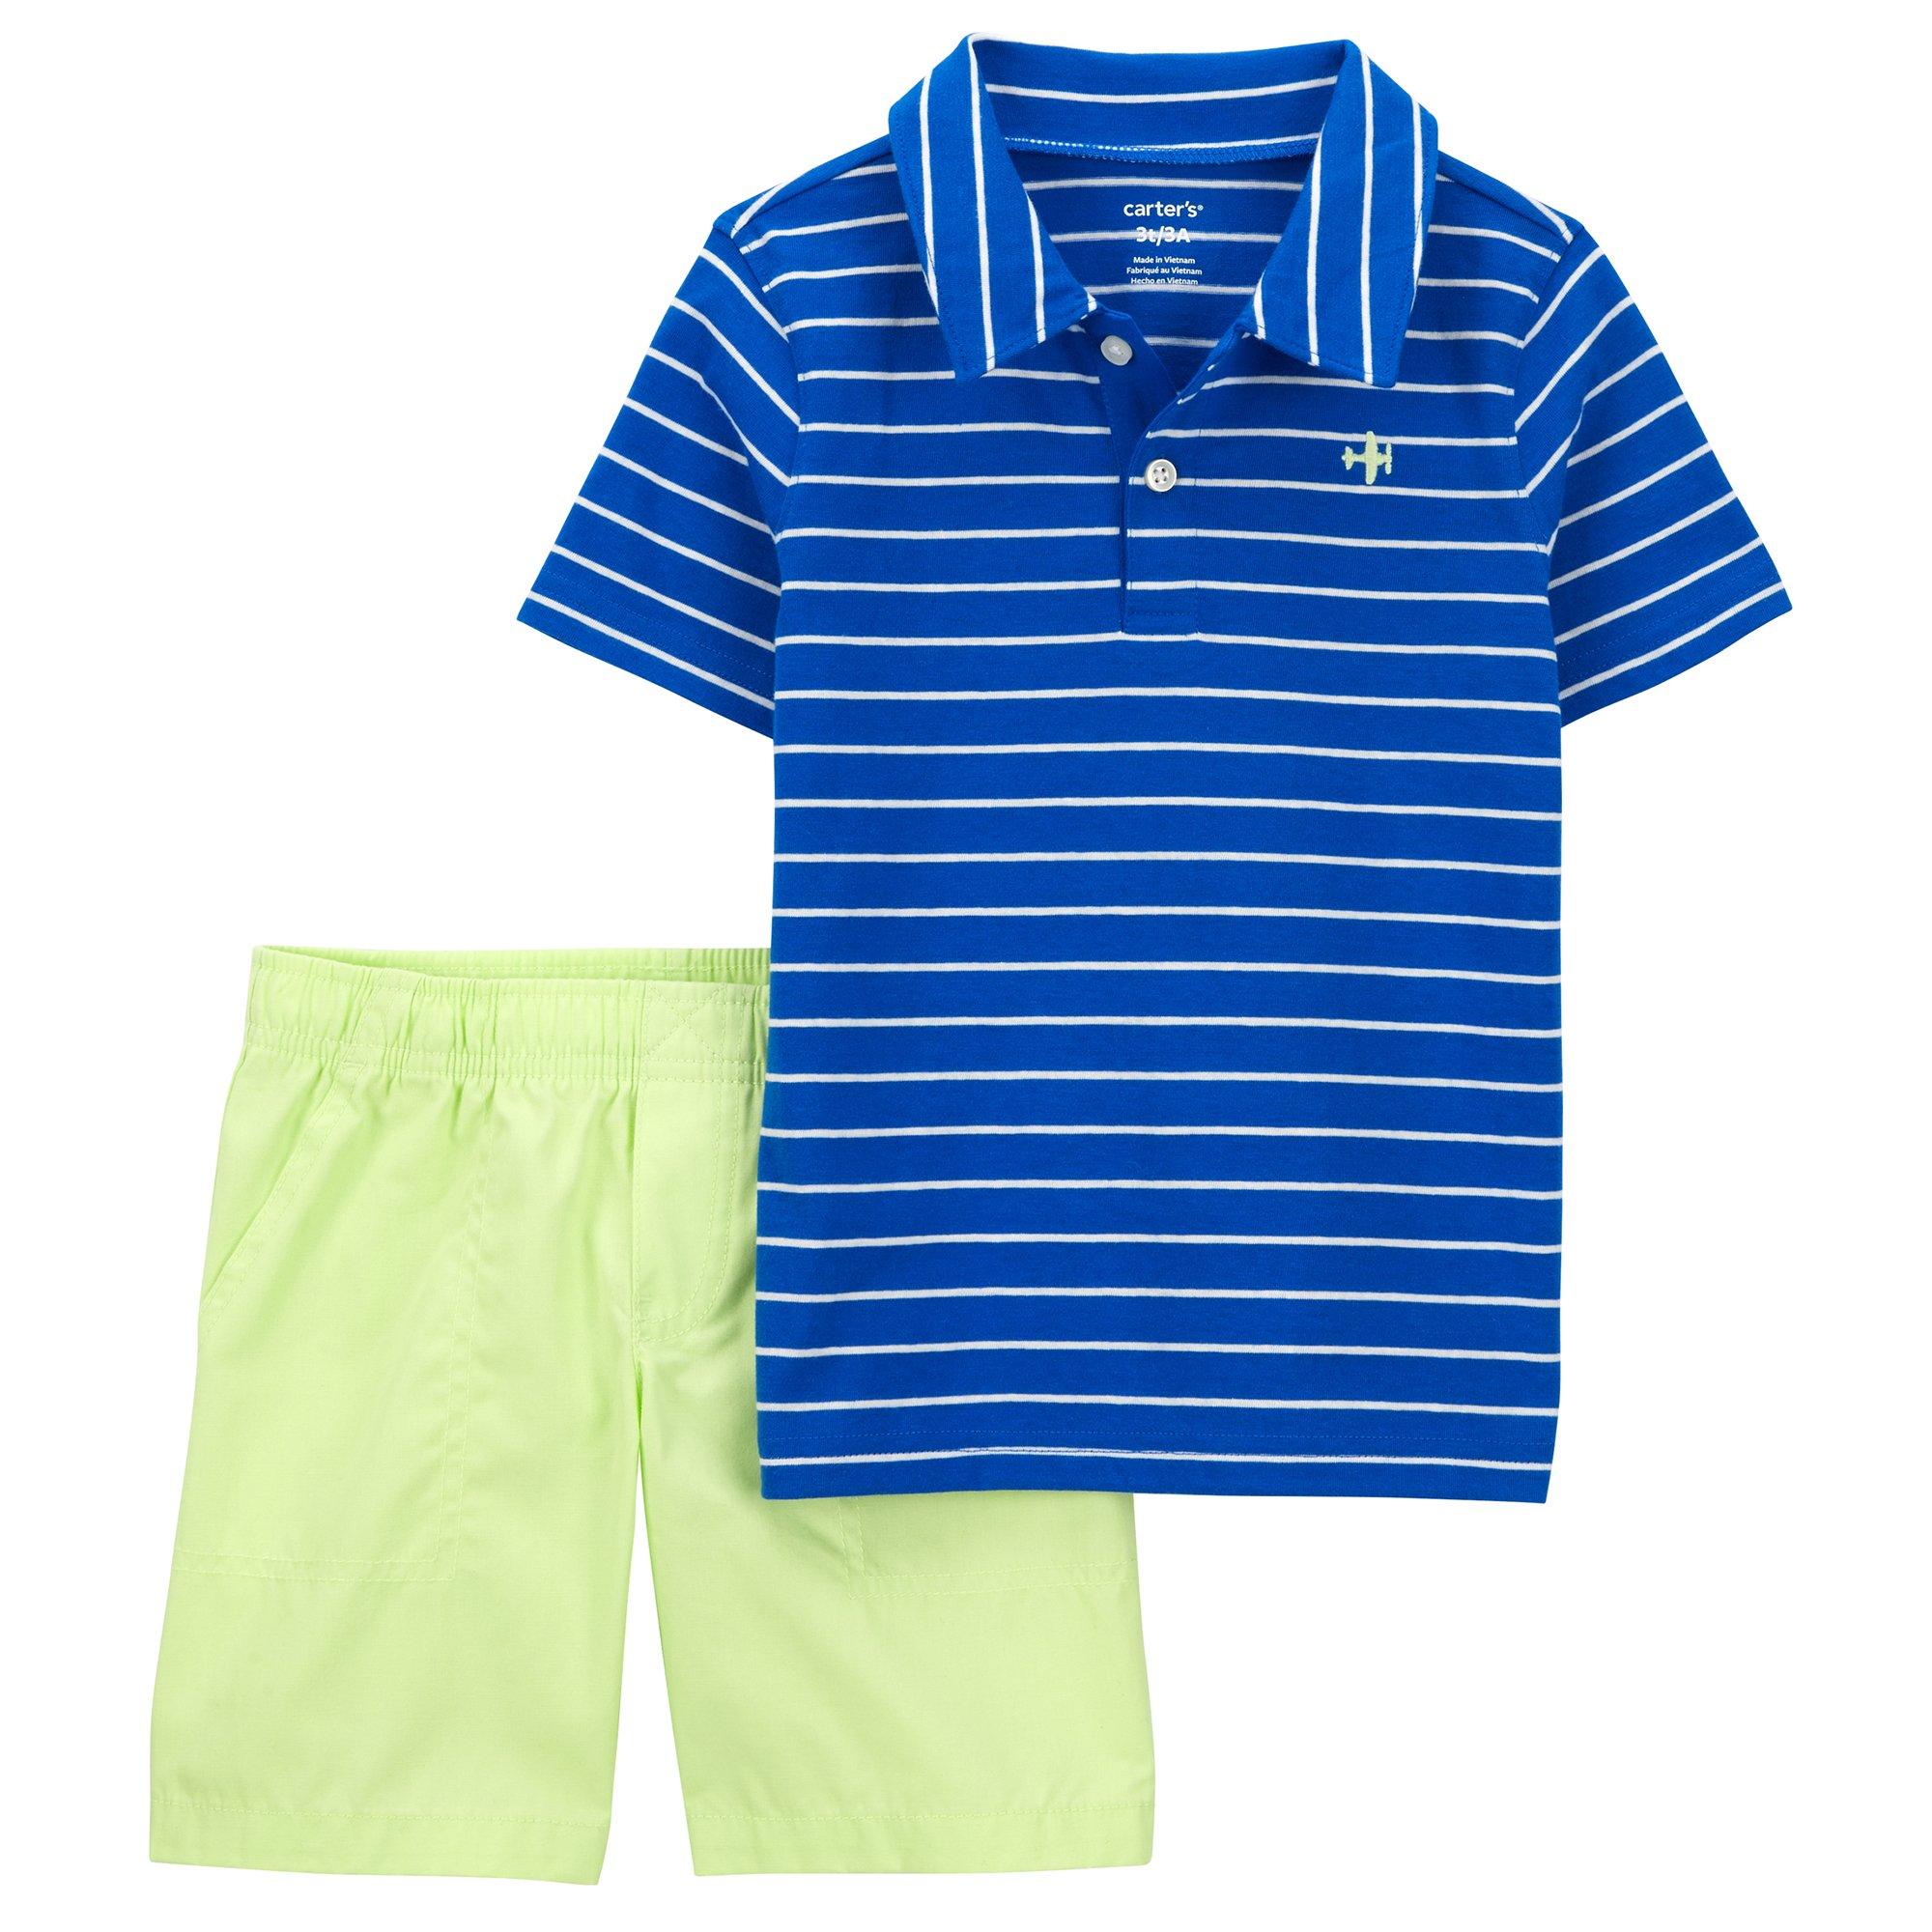 Carters Toddler Boys 2-pc. Airplane Polo and Shorts